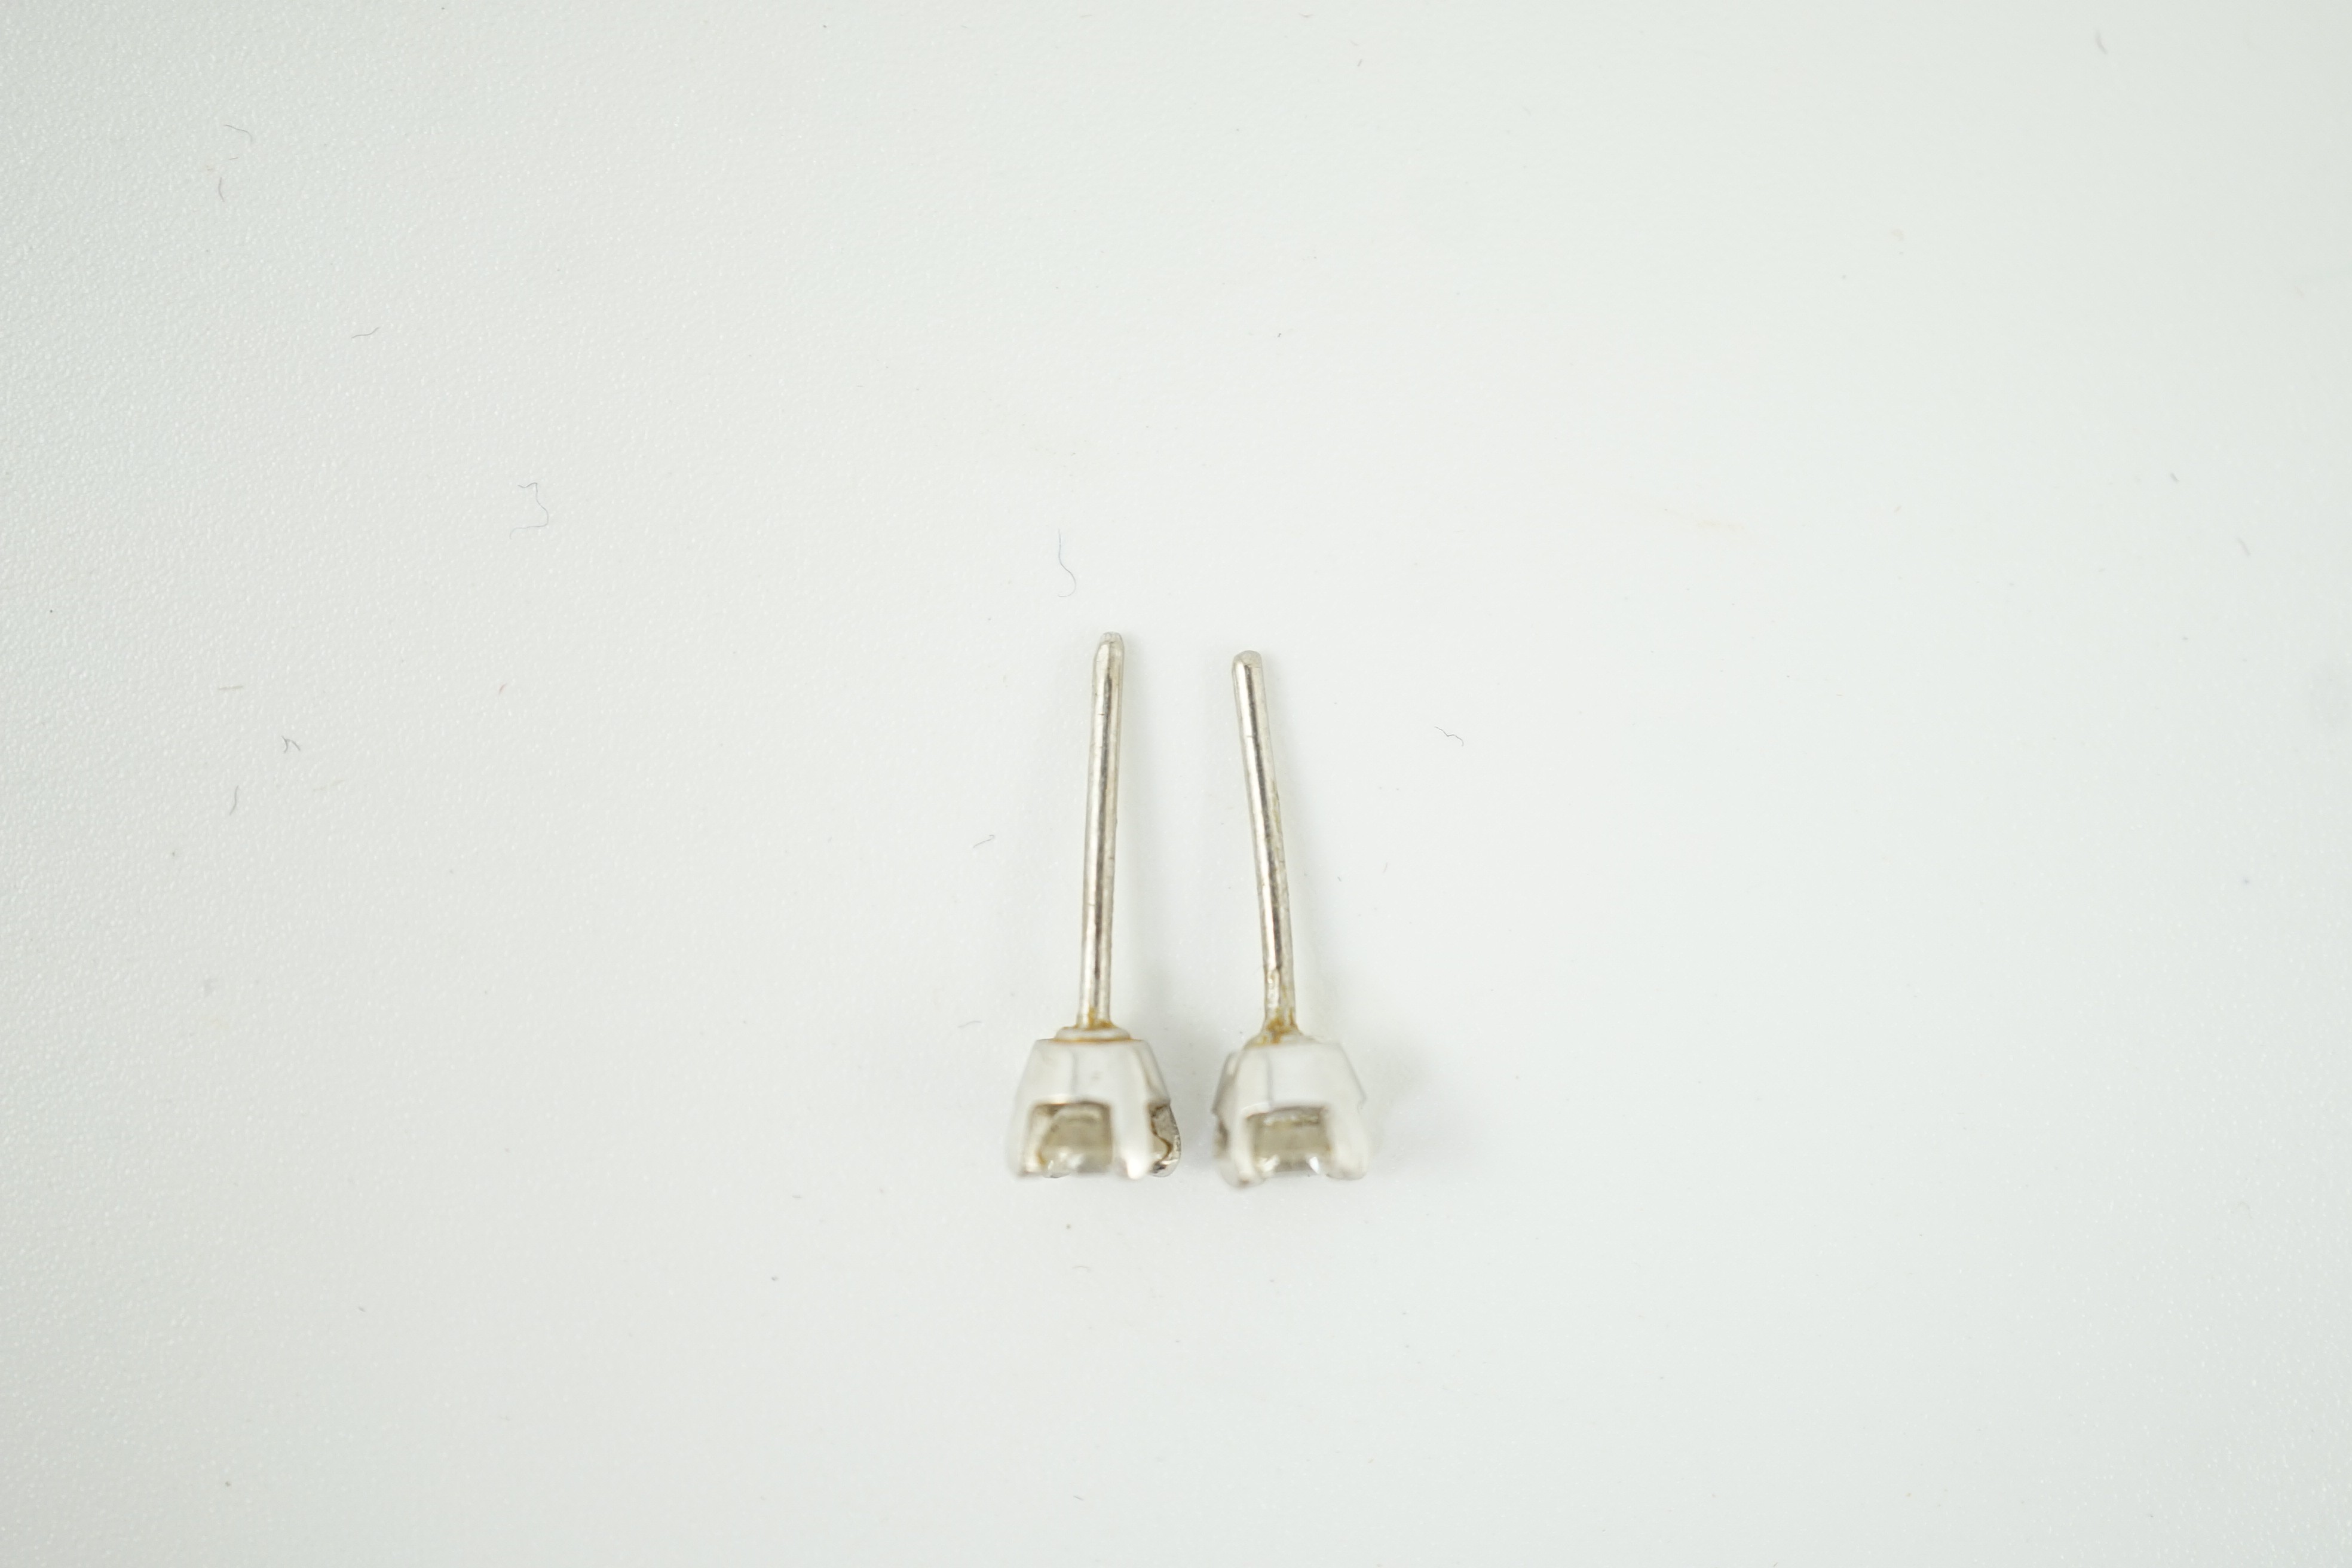 A pair of 9ct white metal and solitaire diamond ear studs, stone diameter approx. 3.4mm, gross weight 0.9 grams.